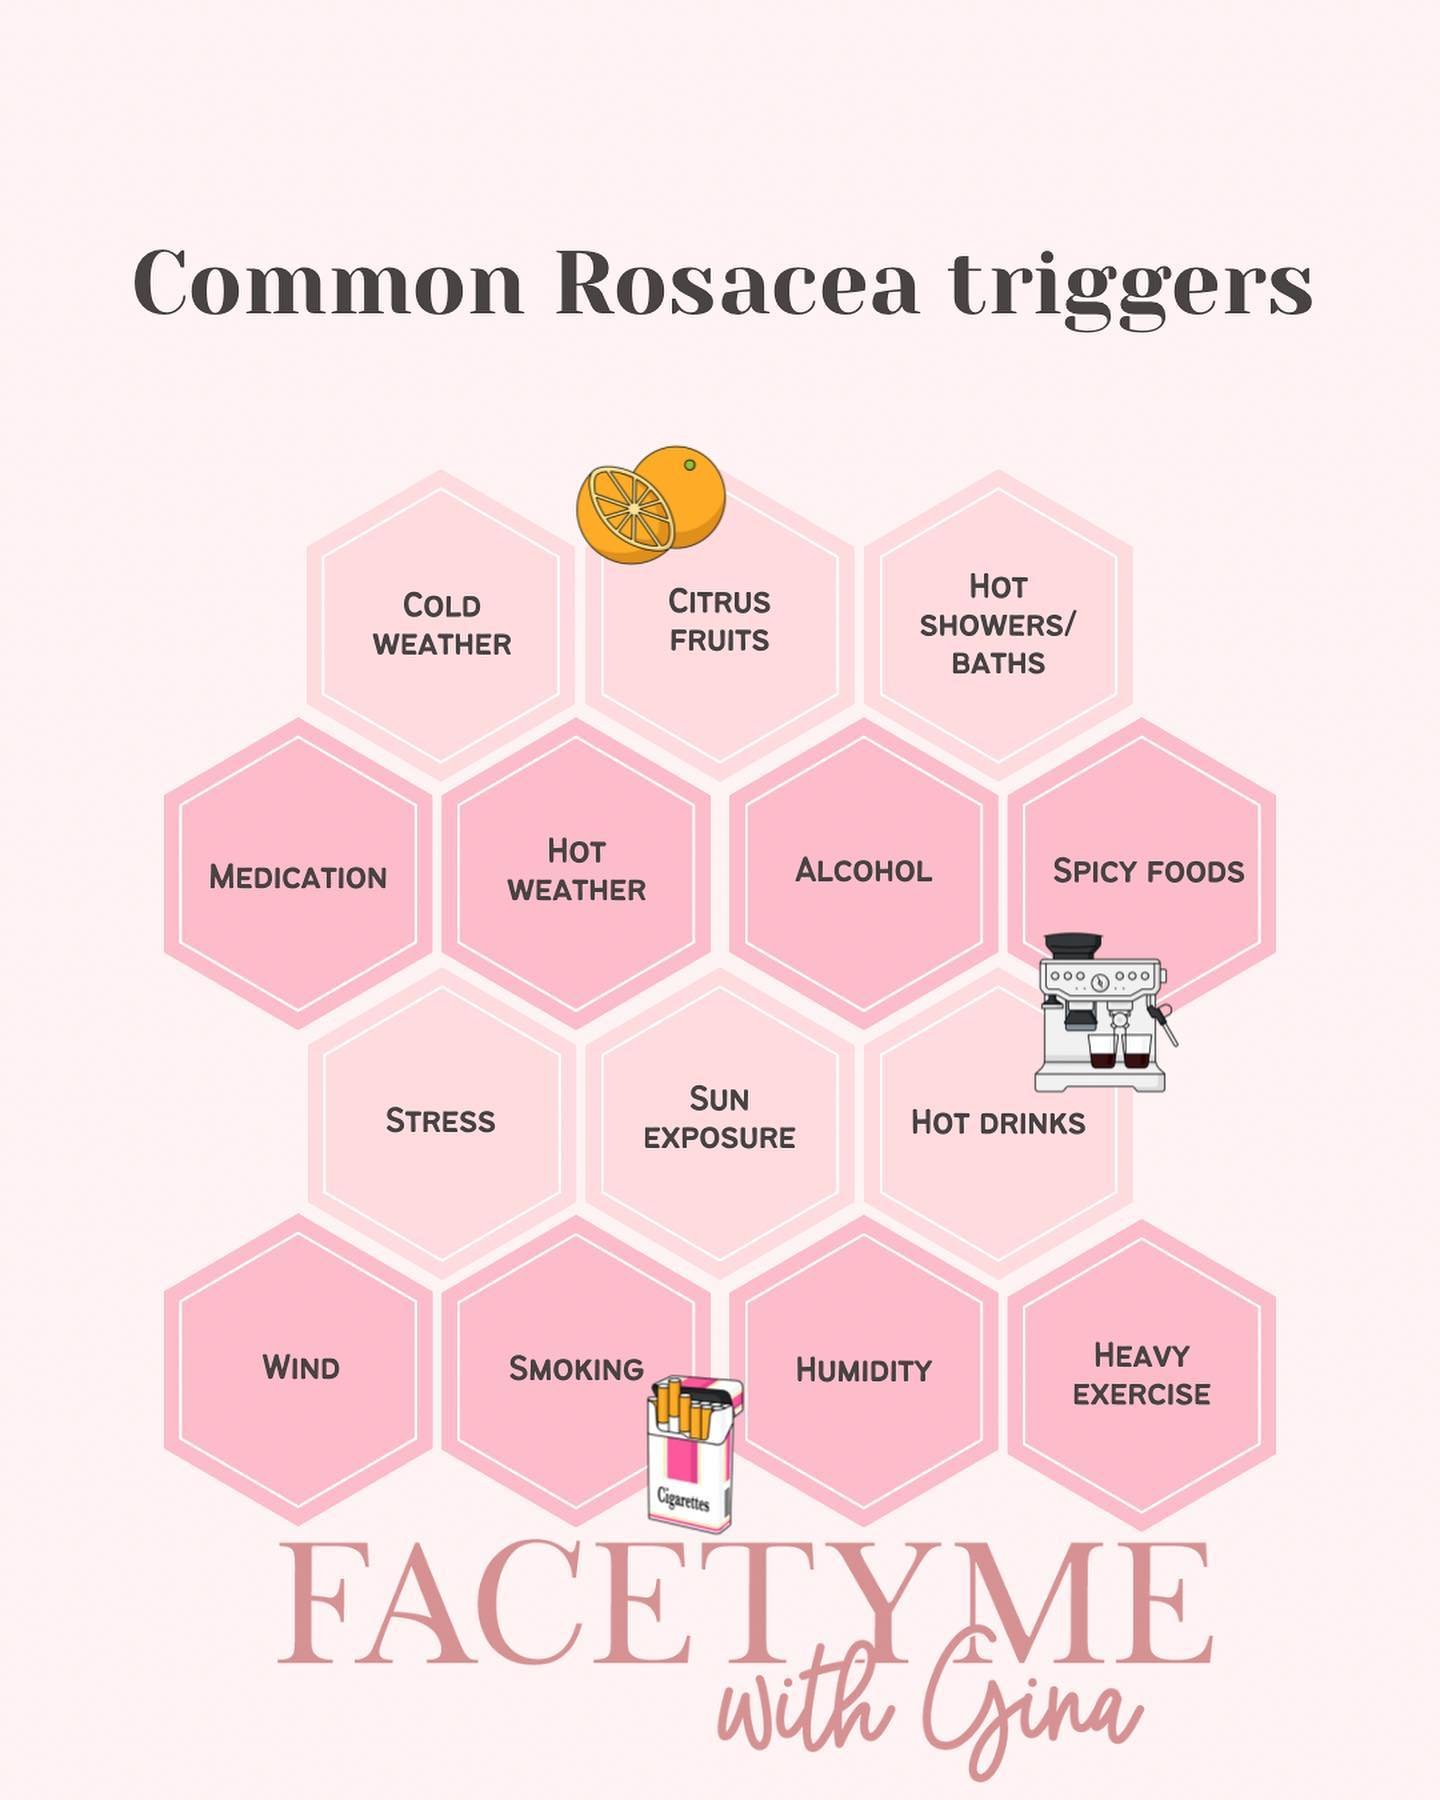 Living with rosacea can feel like any &amp; everything triggers your rosacea. While this is a list of common triggers does not mean they are for YOU. Keeping a diary can help you figure out YOUR triggers. Knowledge is power! #altoesthetician #ruidoso